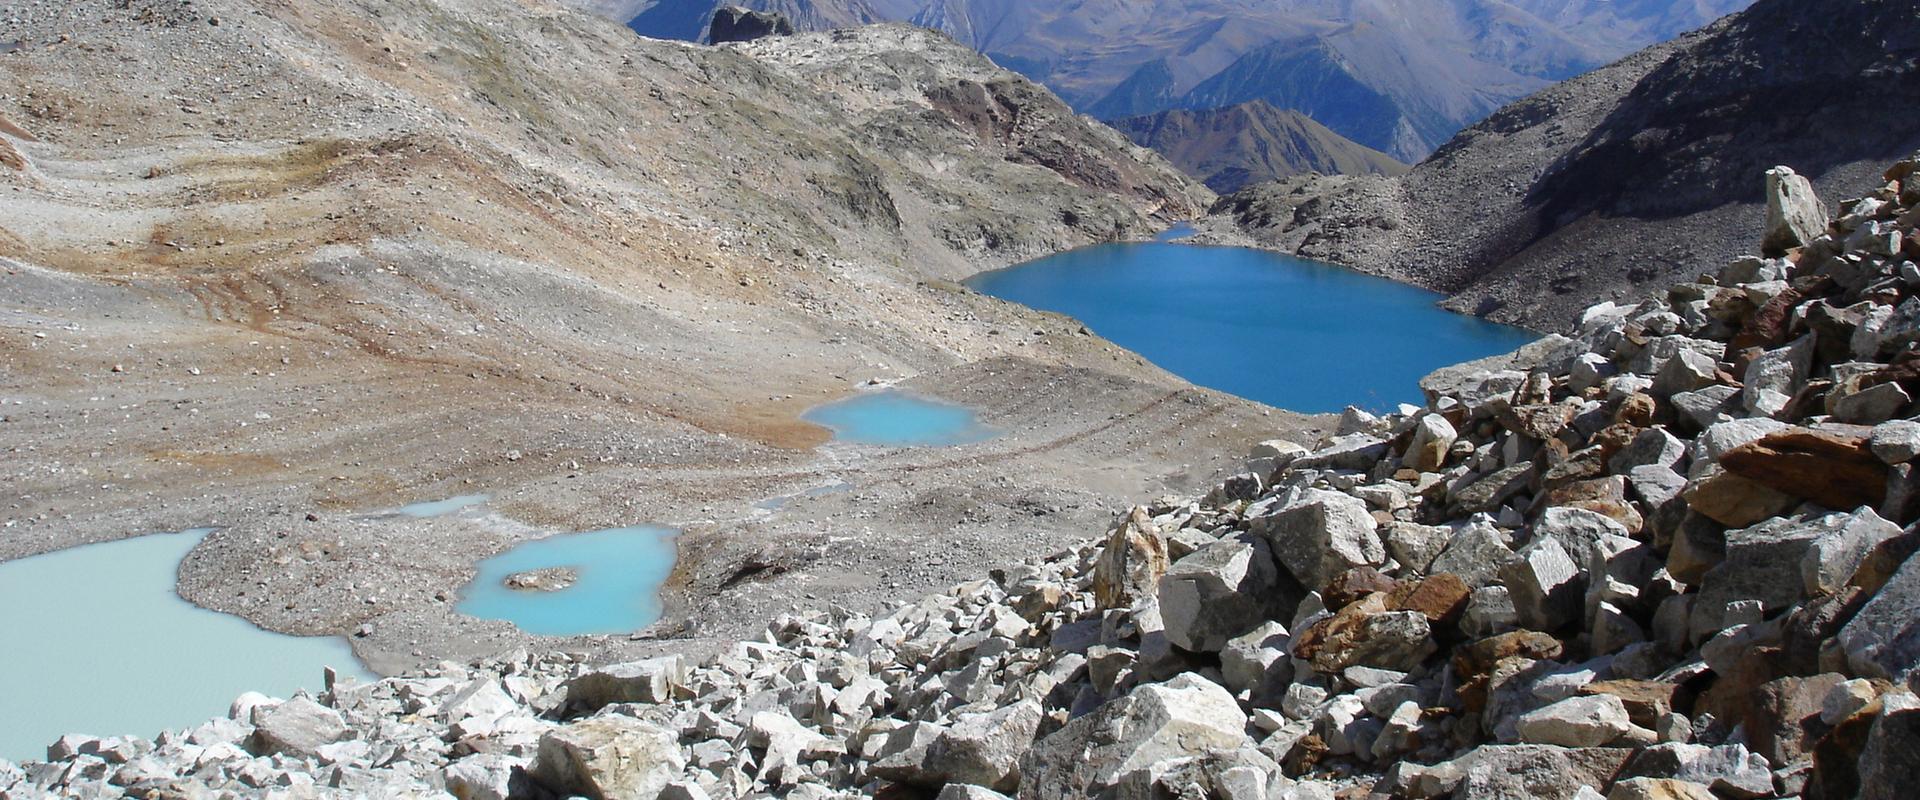 High-altitude lakes in the Aneto Range, Pyrenees